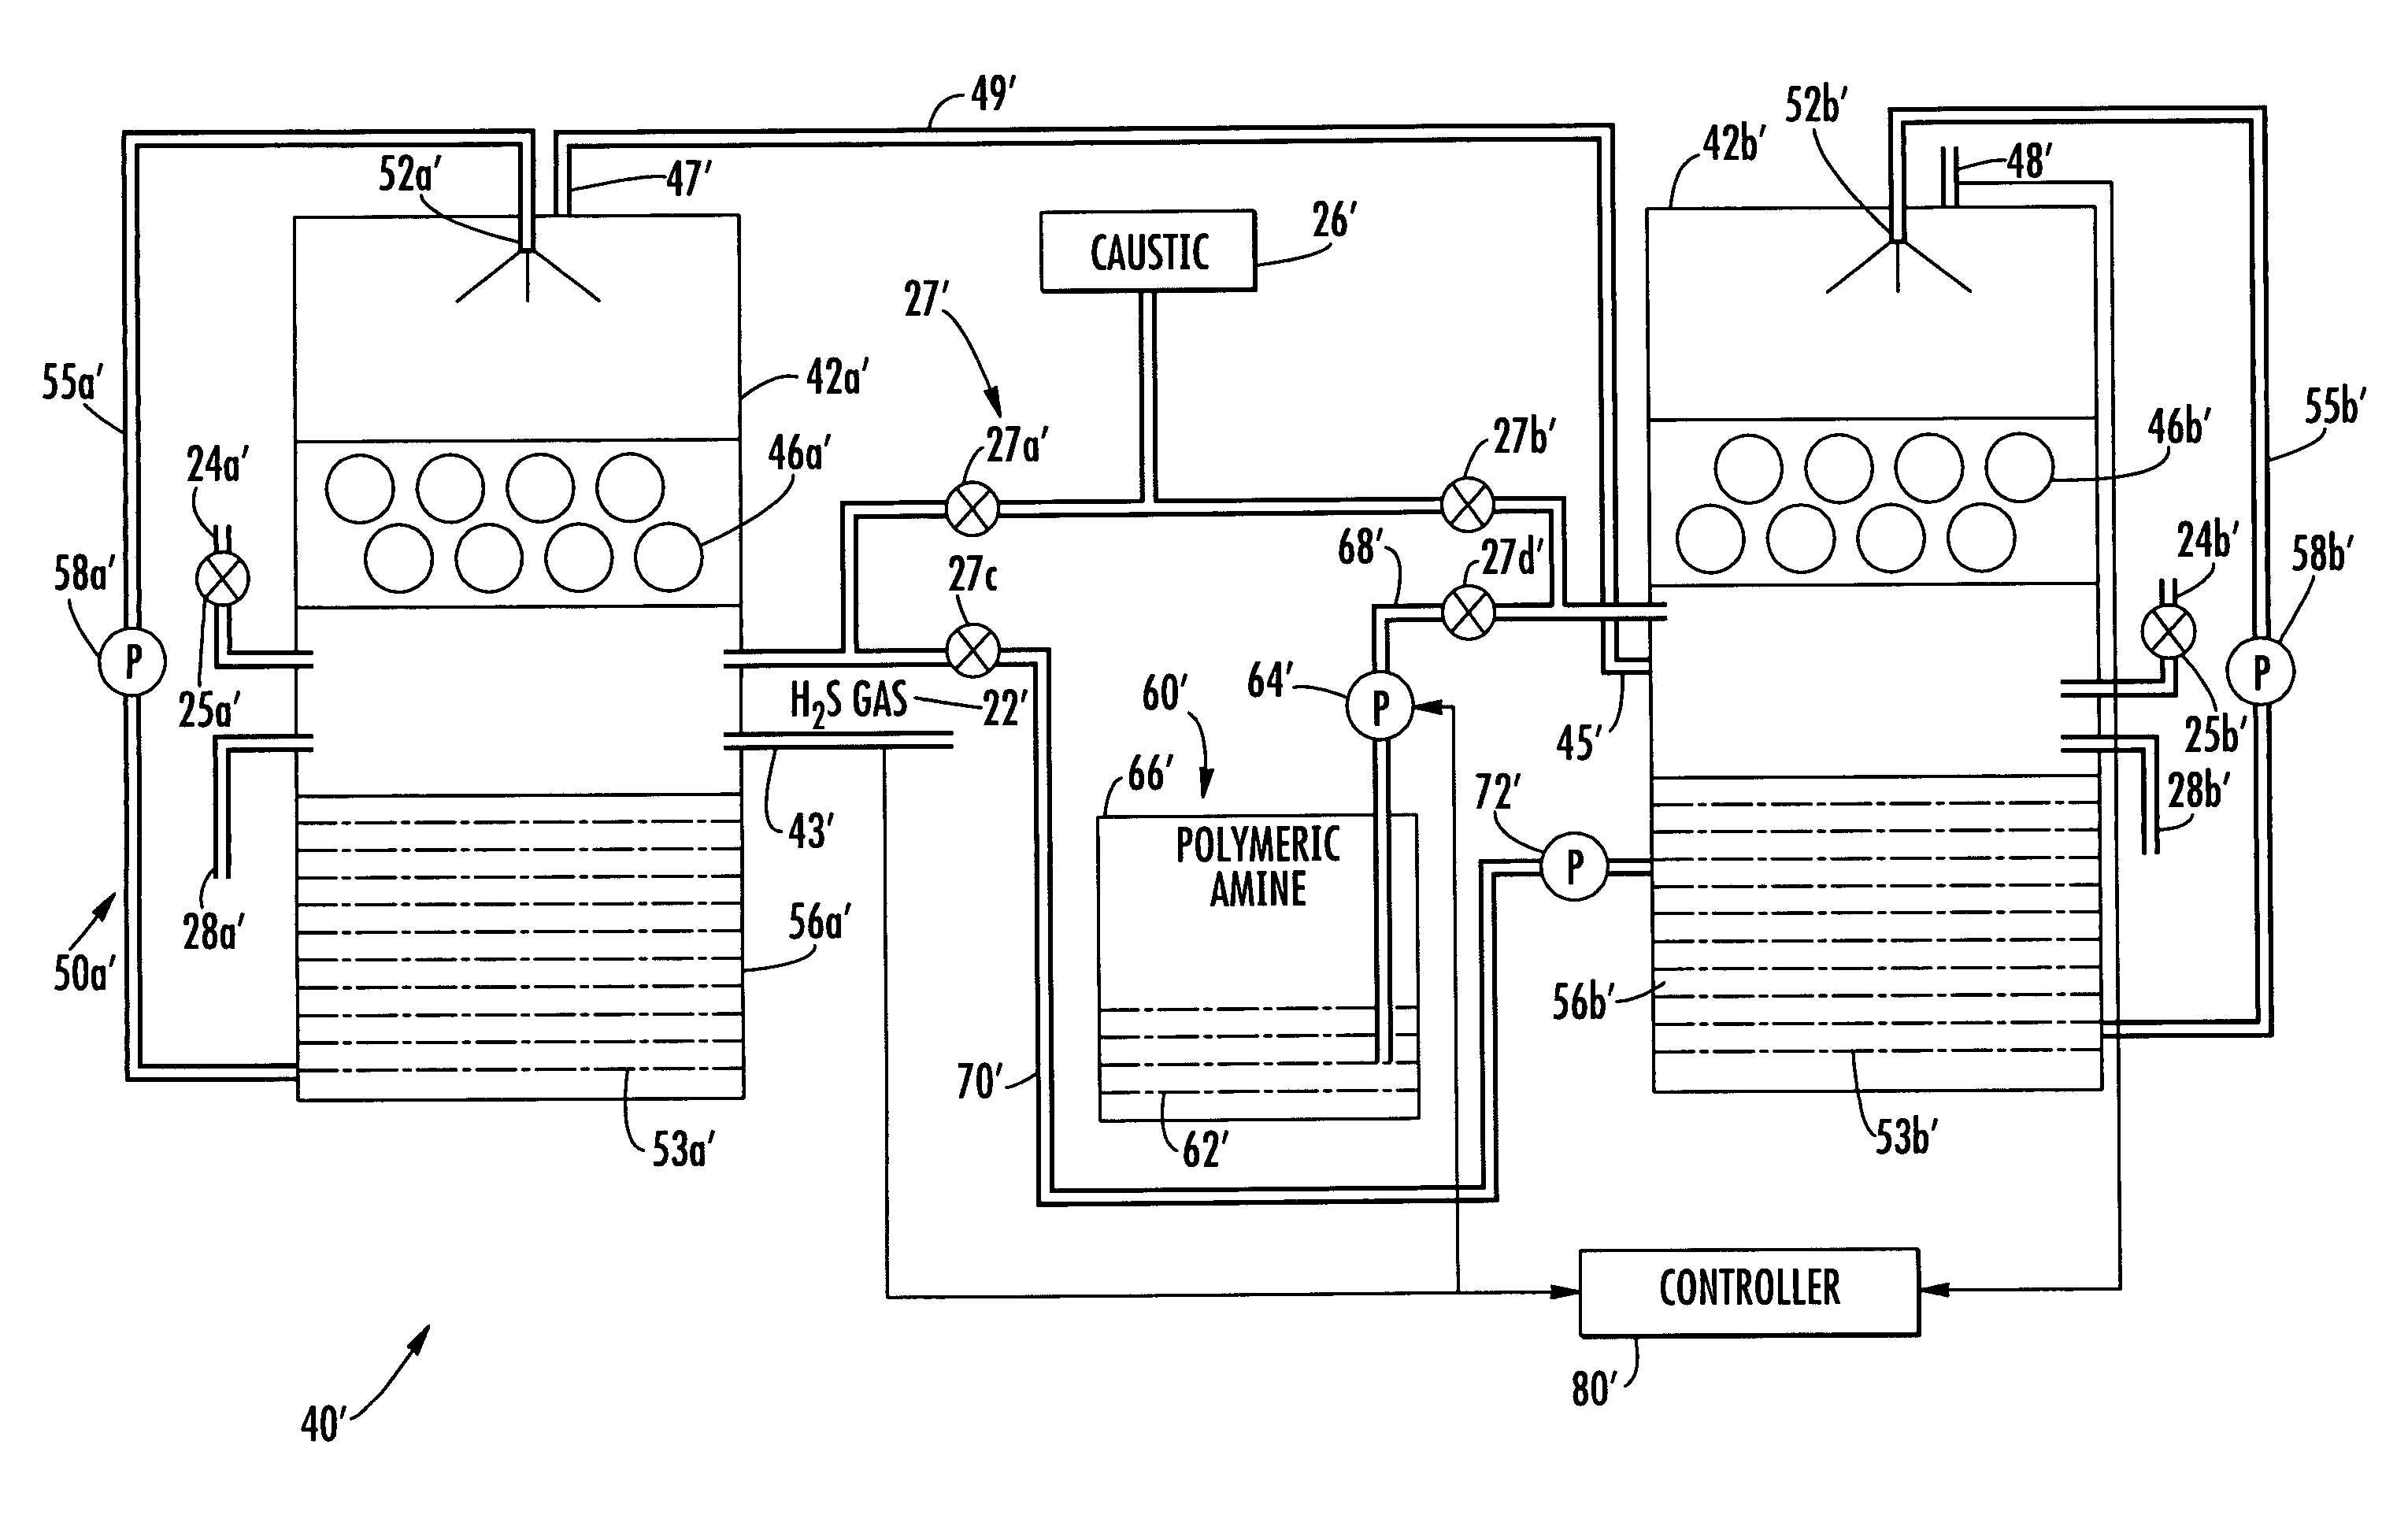 Hydrogen sulfide scrubber using polymeric amine and associated methods